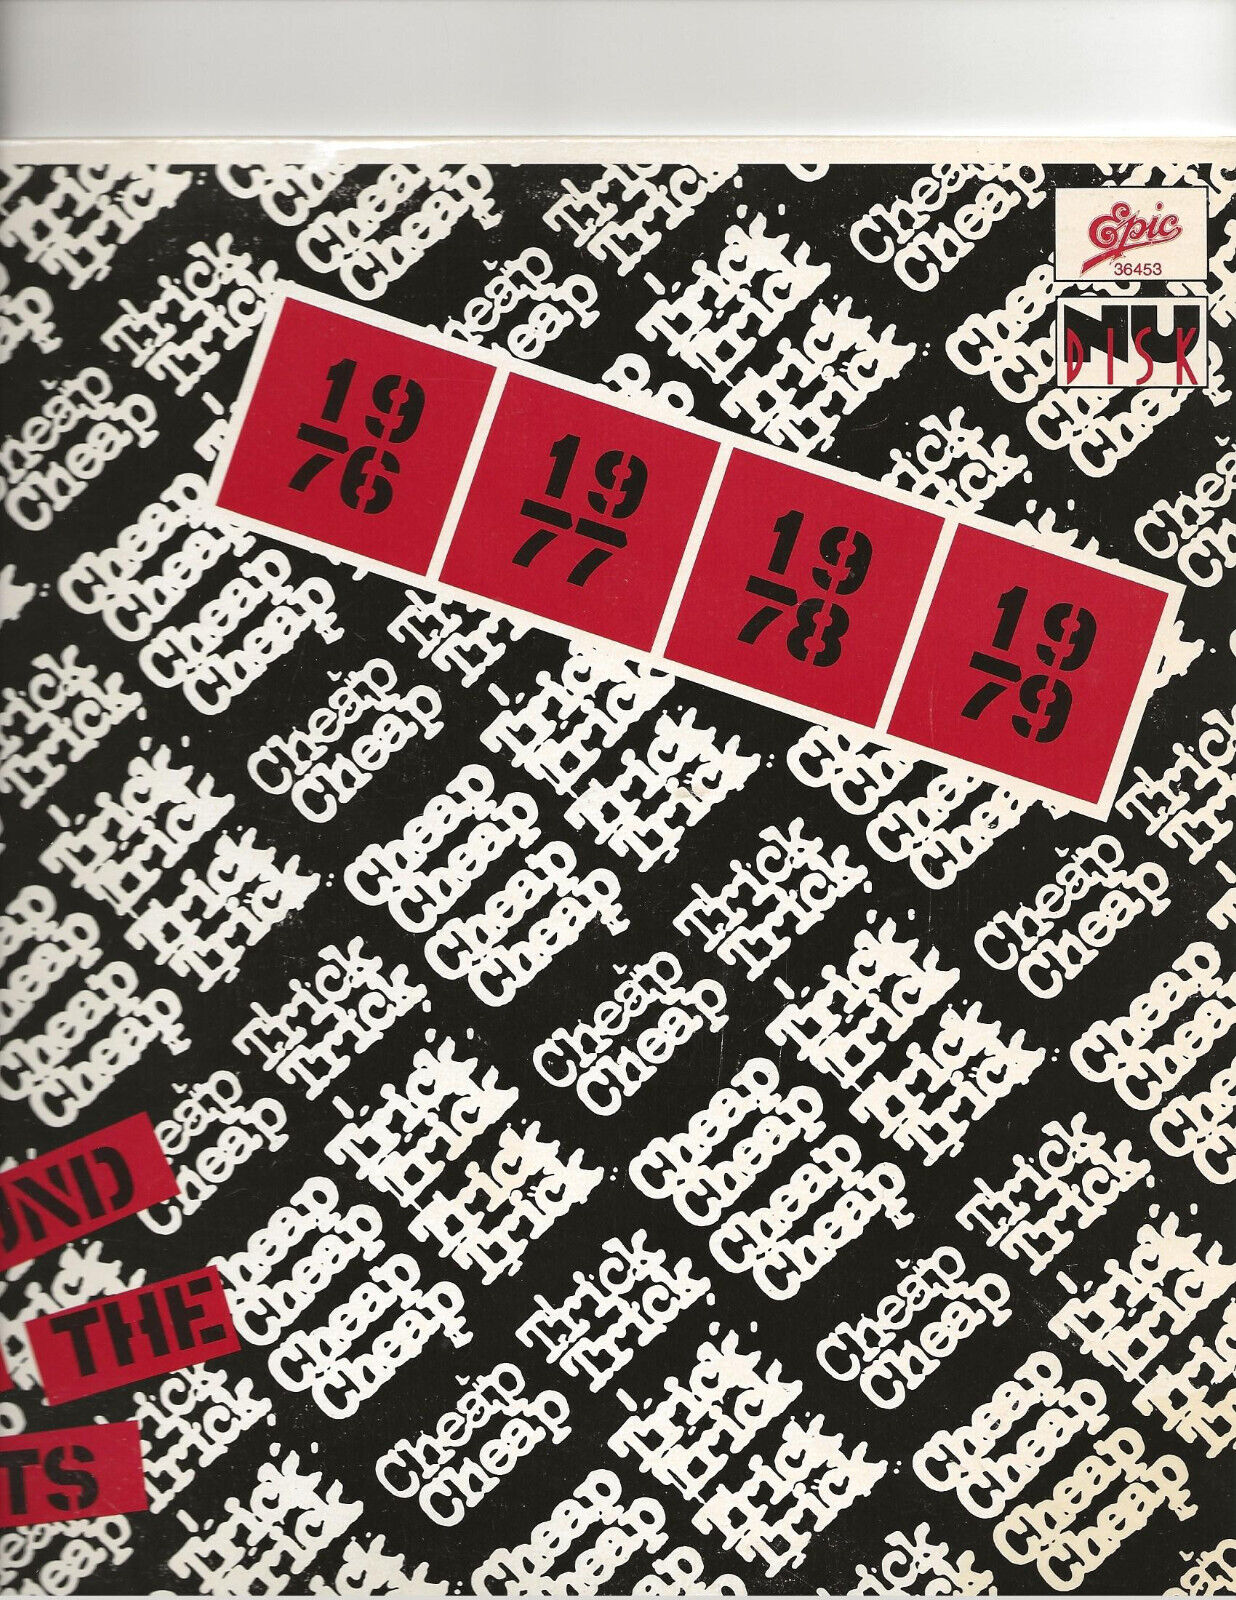 Cheap Trick - Found All The Parts EP (includes bonus 7” 45 Everything Works Out)